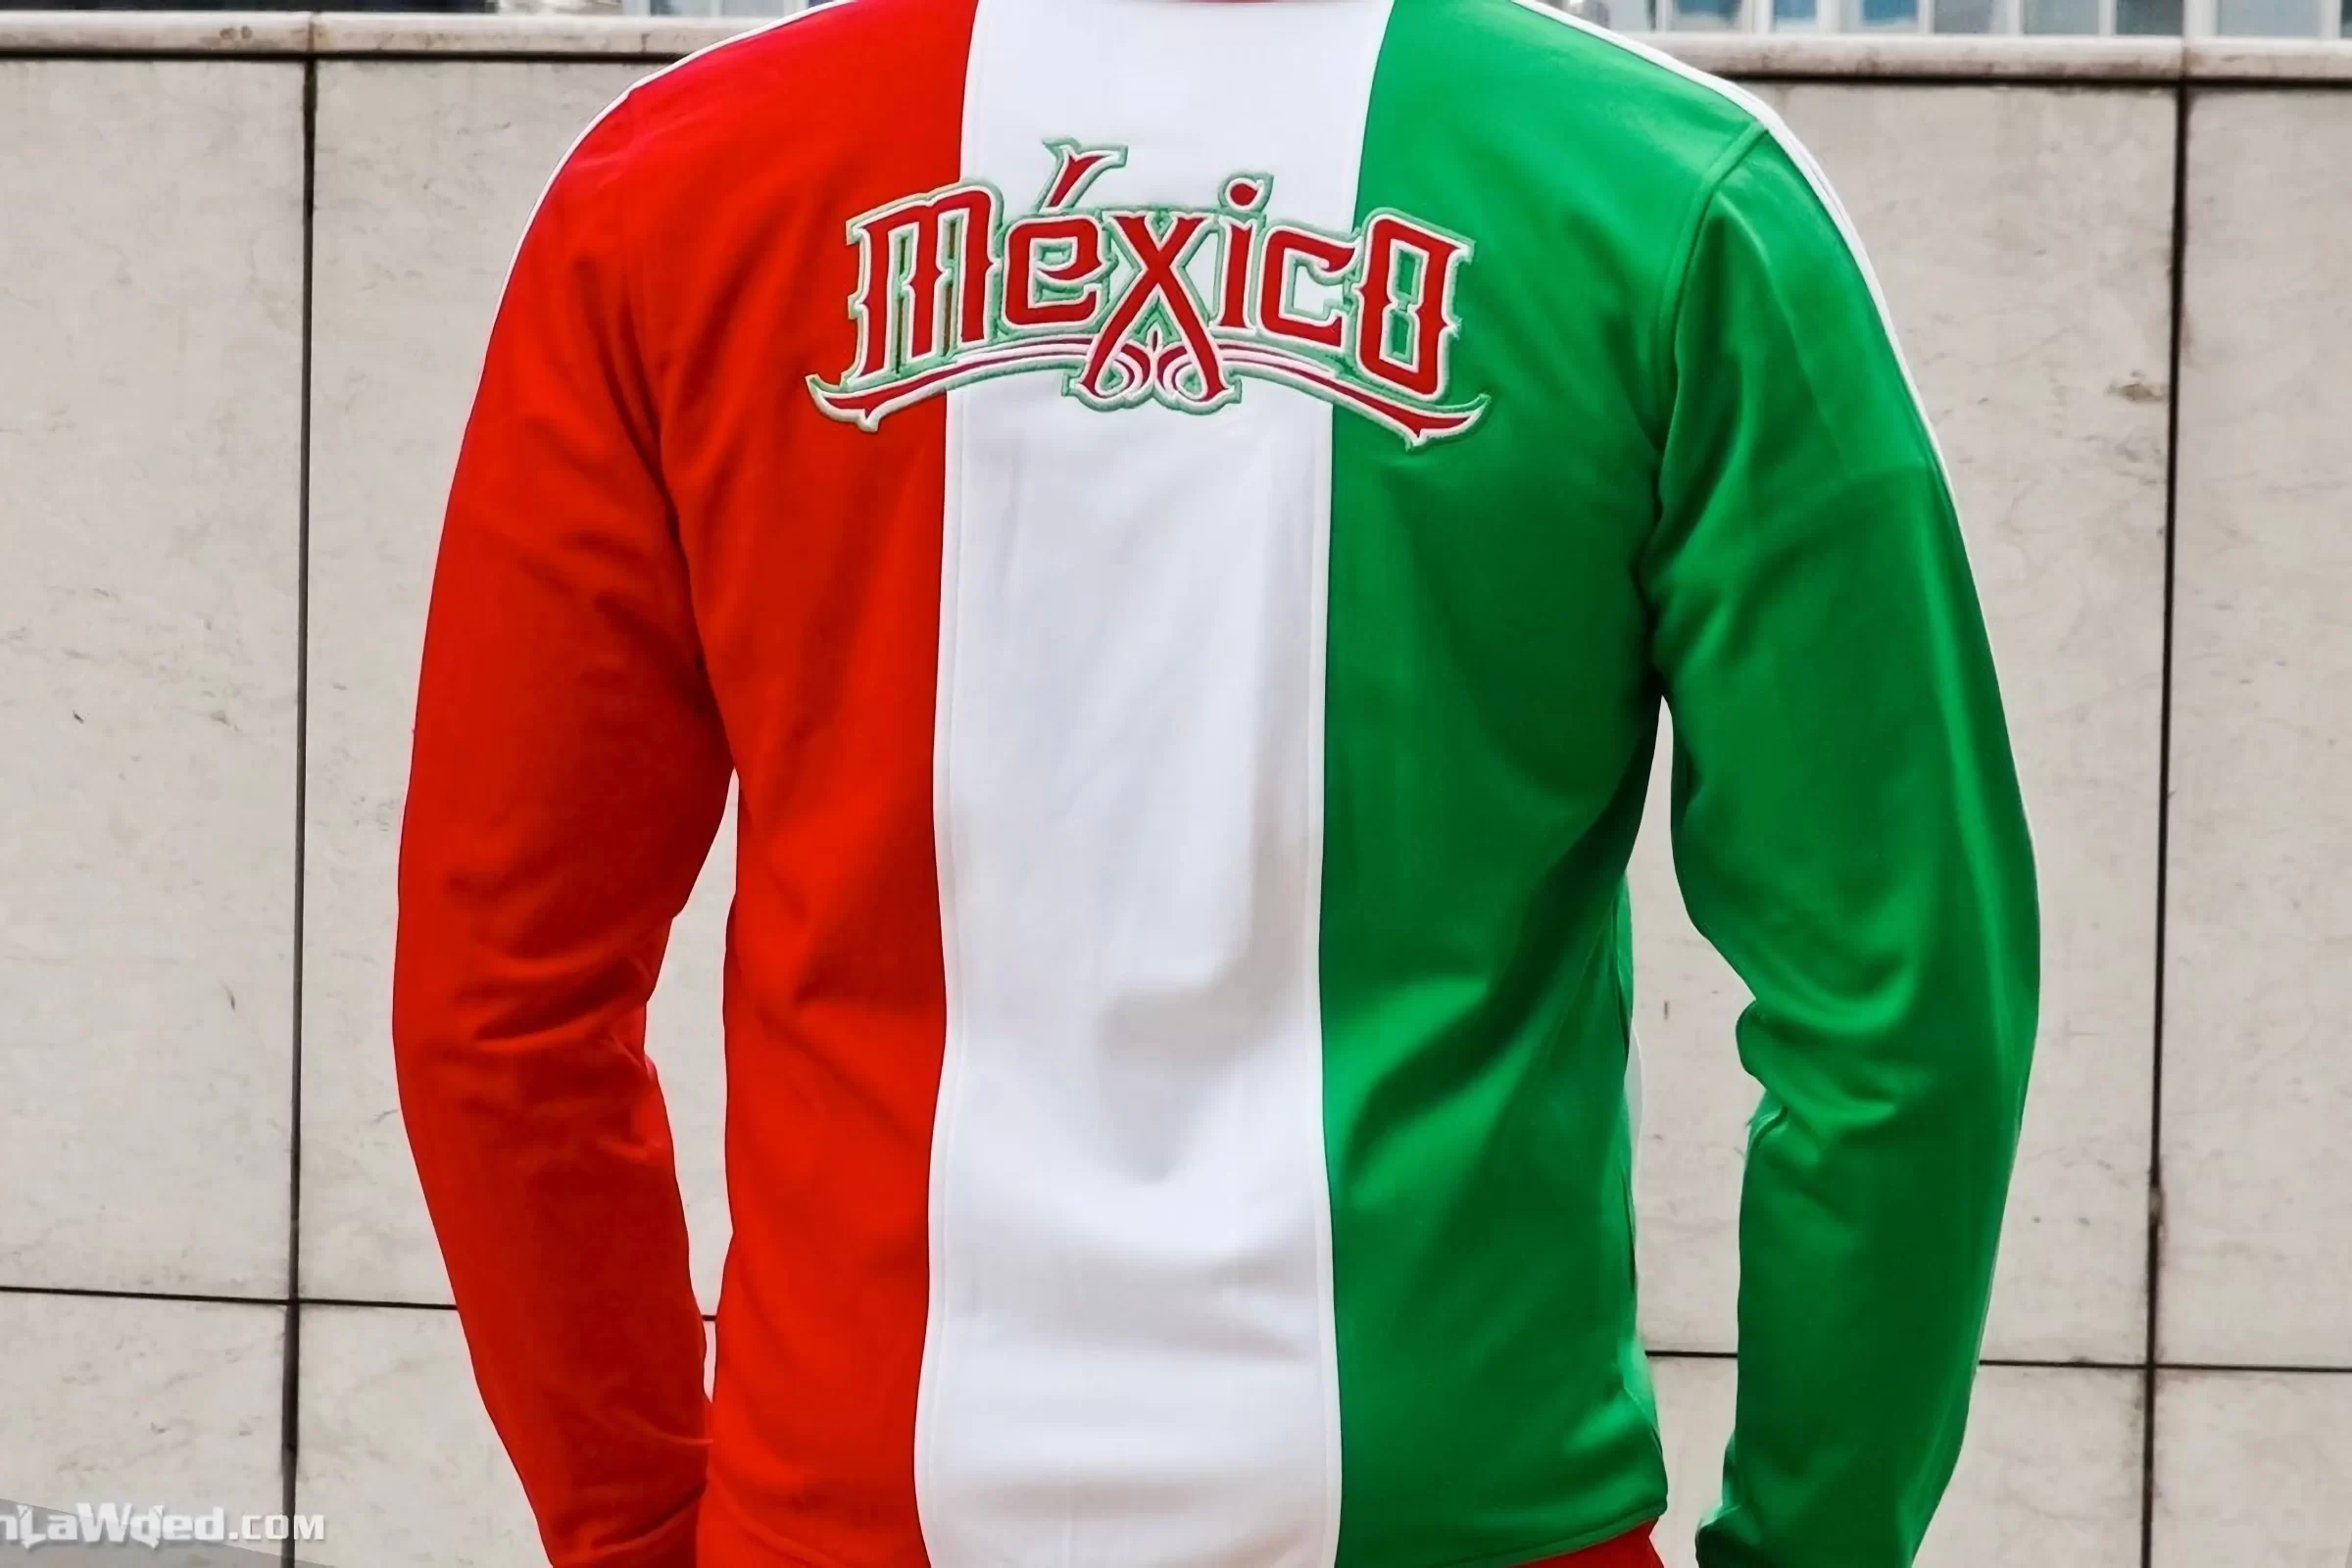 Men’s 2007 Mexico Track Top by Adidas Originals: Approved (EnLawded.com file #lmchk90571ip2y123301kg9st)